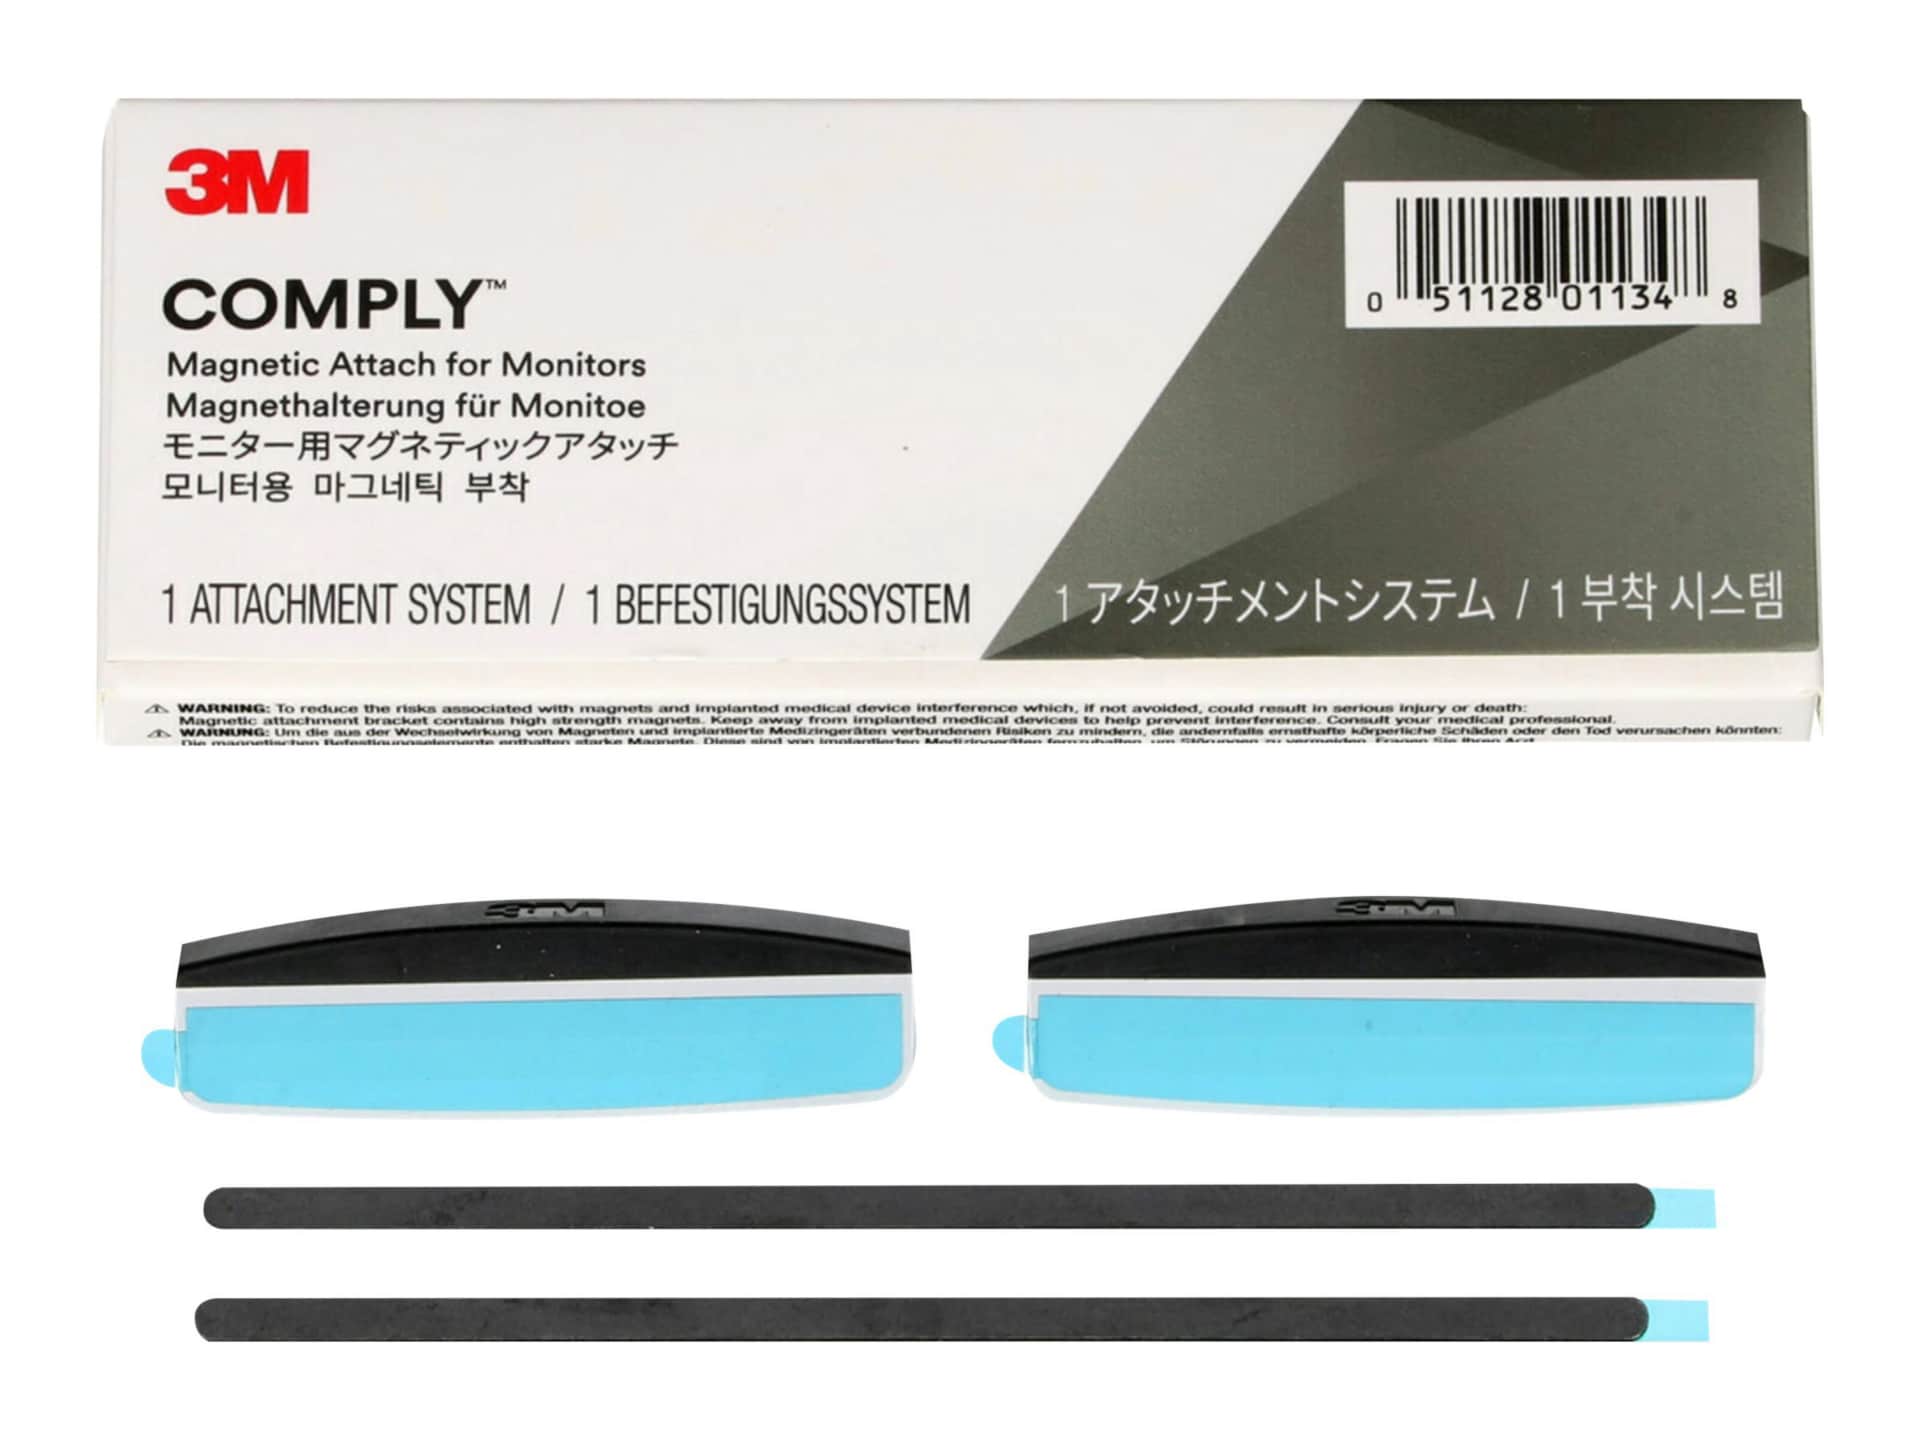 3M Comply Magnetic Attach for Monitors Kit